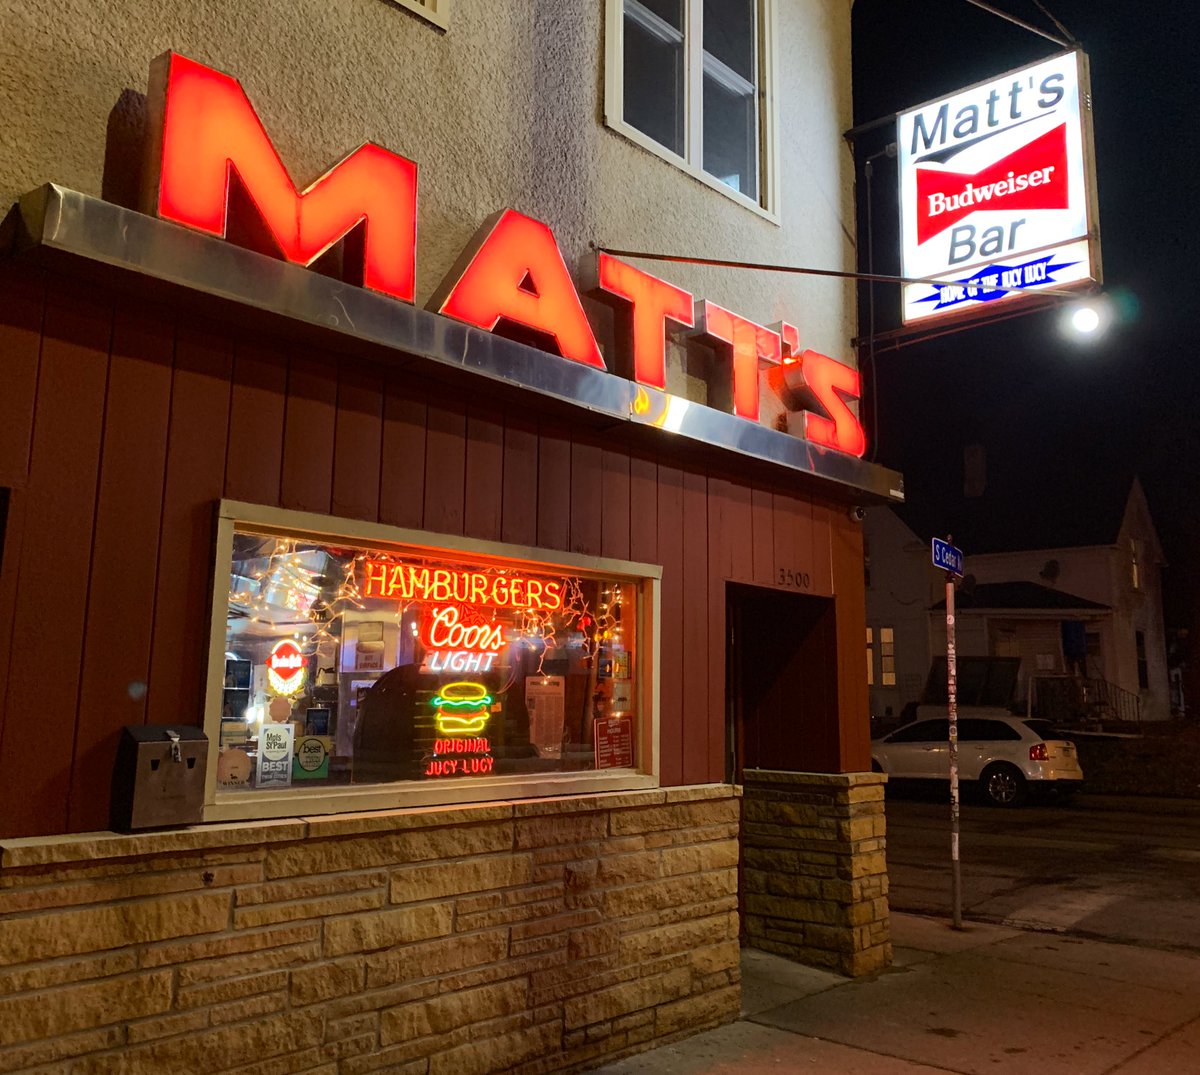 Oh c’mon, who am I kidding? The best thing to happen on this day one year ago was our trip to Matt’s Bar for their world famous Jucy Lucy - a cheeseburger with the cheese INSIDE the meat. So good!Right,  @AnthonyWTKR  @johnrector_gp?